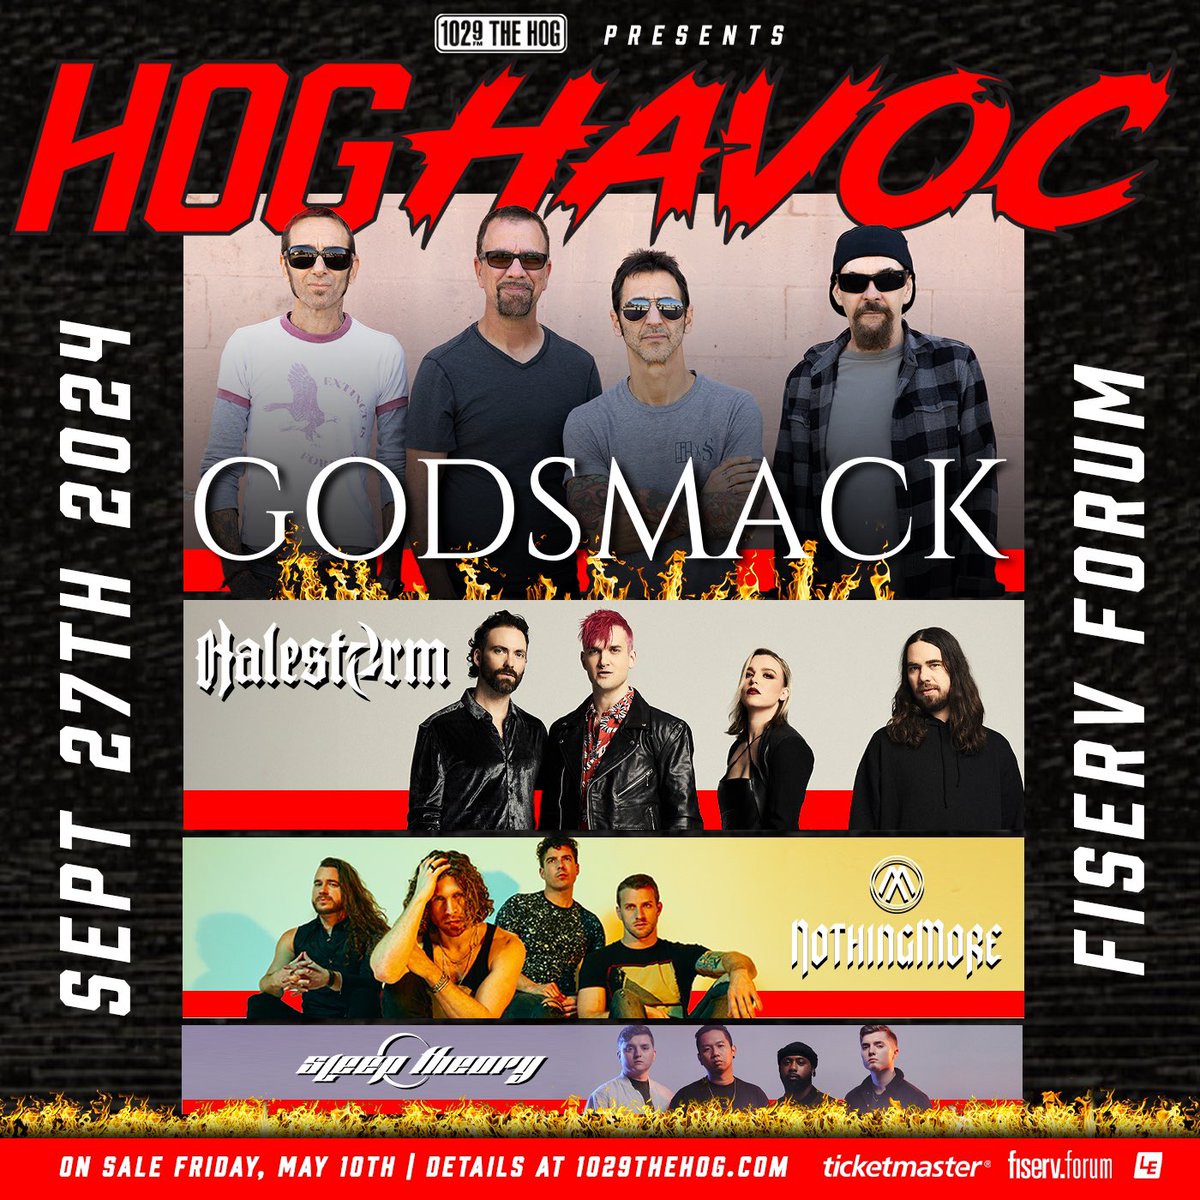 JUST ANNOUNCED 🔥 Get ready to rock with @1029TheHOG as it proudly presents HOG Havoc on Fri, Sept. 27. Legendary rock giant Godsmack leads a powerhouse lineup with Halestorm, Nothing More and Sleep Theory. Tickets on sale Friday! 🤘🎸